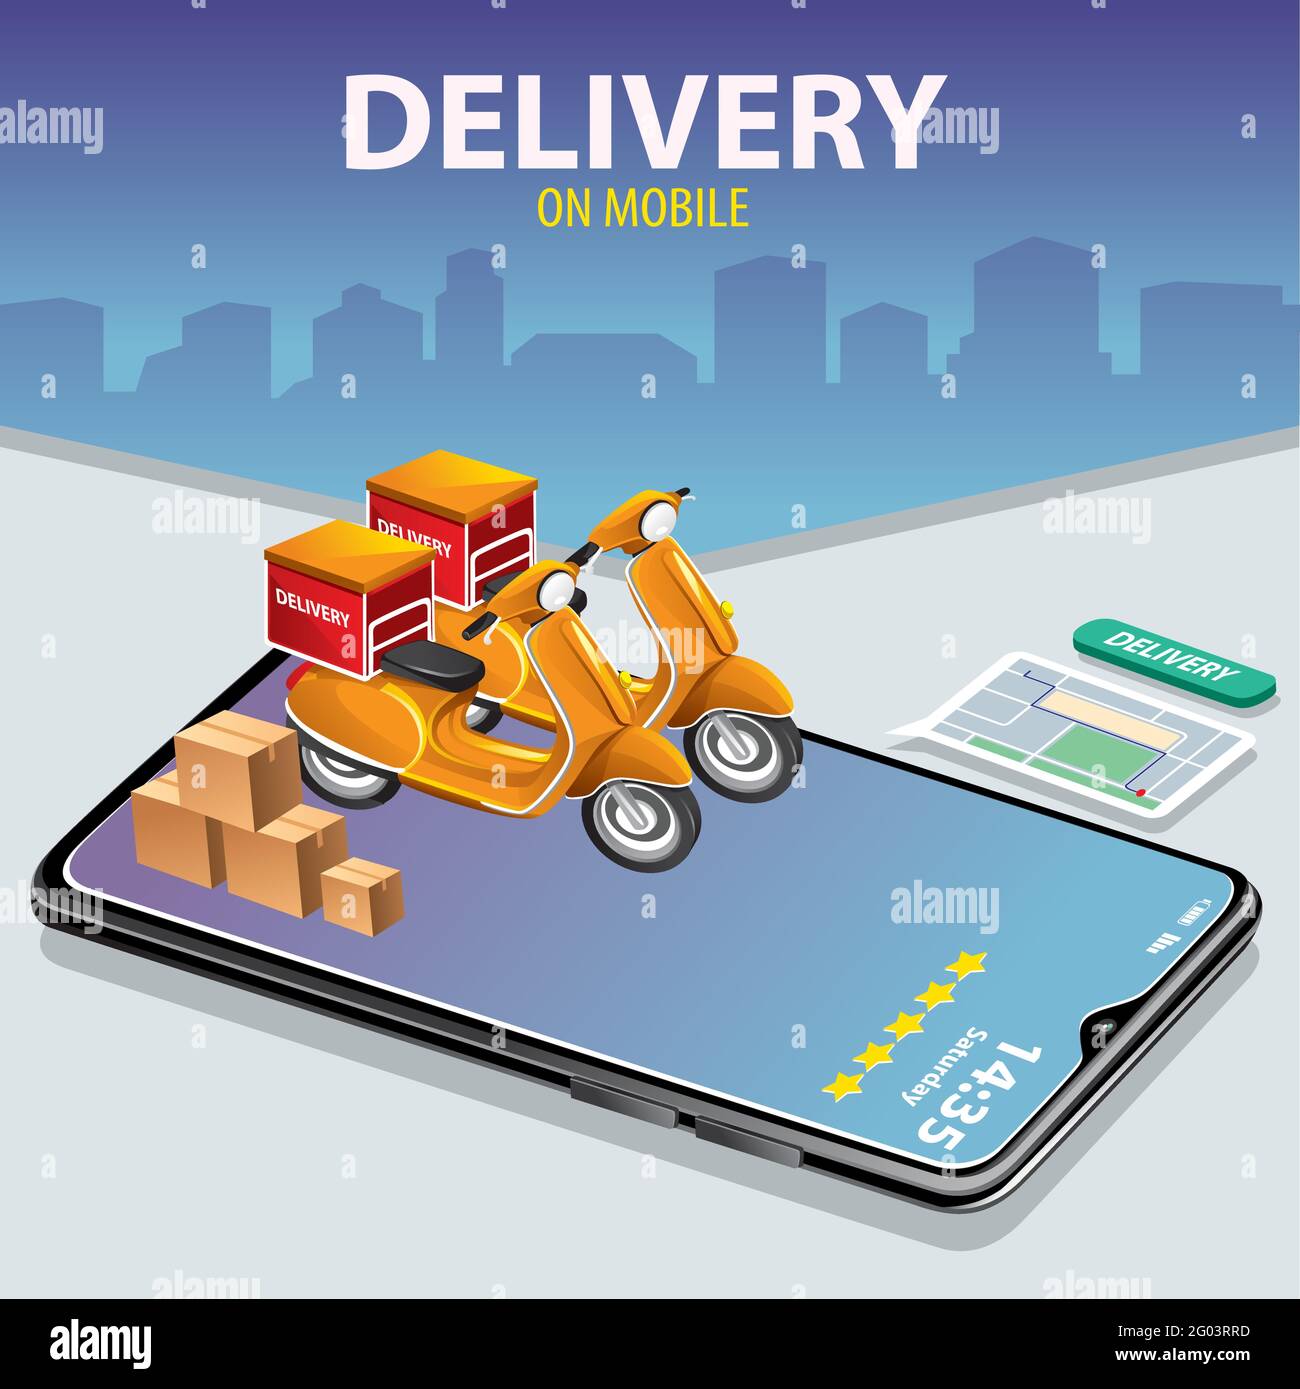 Fast delivery by scooter on mobile. E-commerce concept. Online food order infographic. Webpage, app design. Grey and blue background. Stock Vector